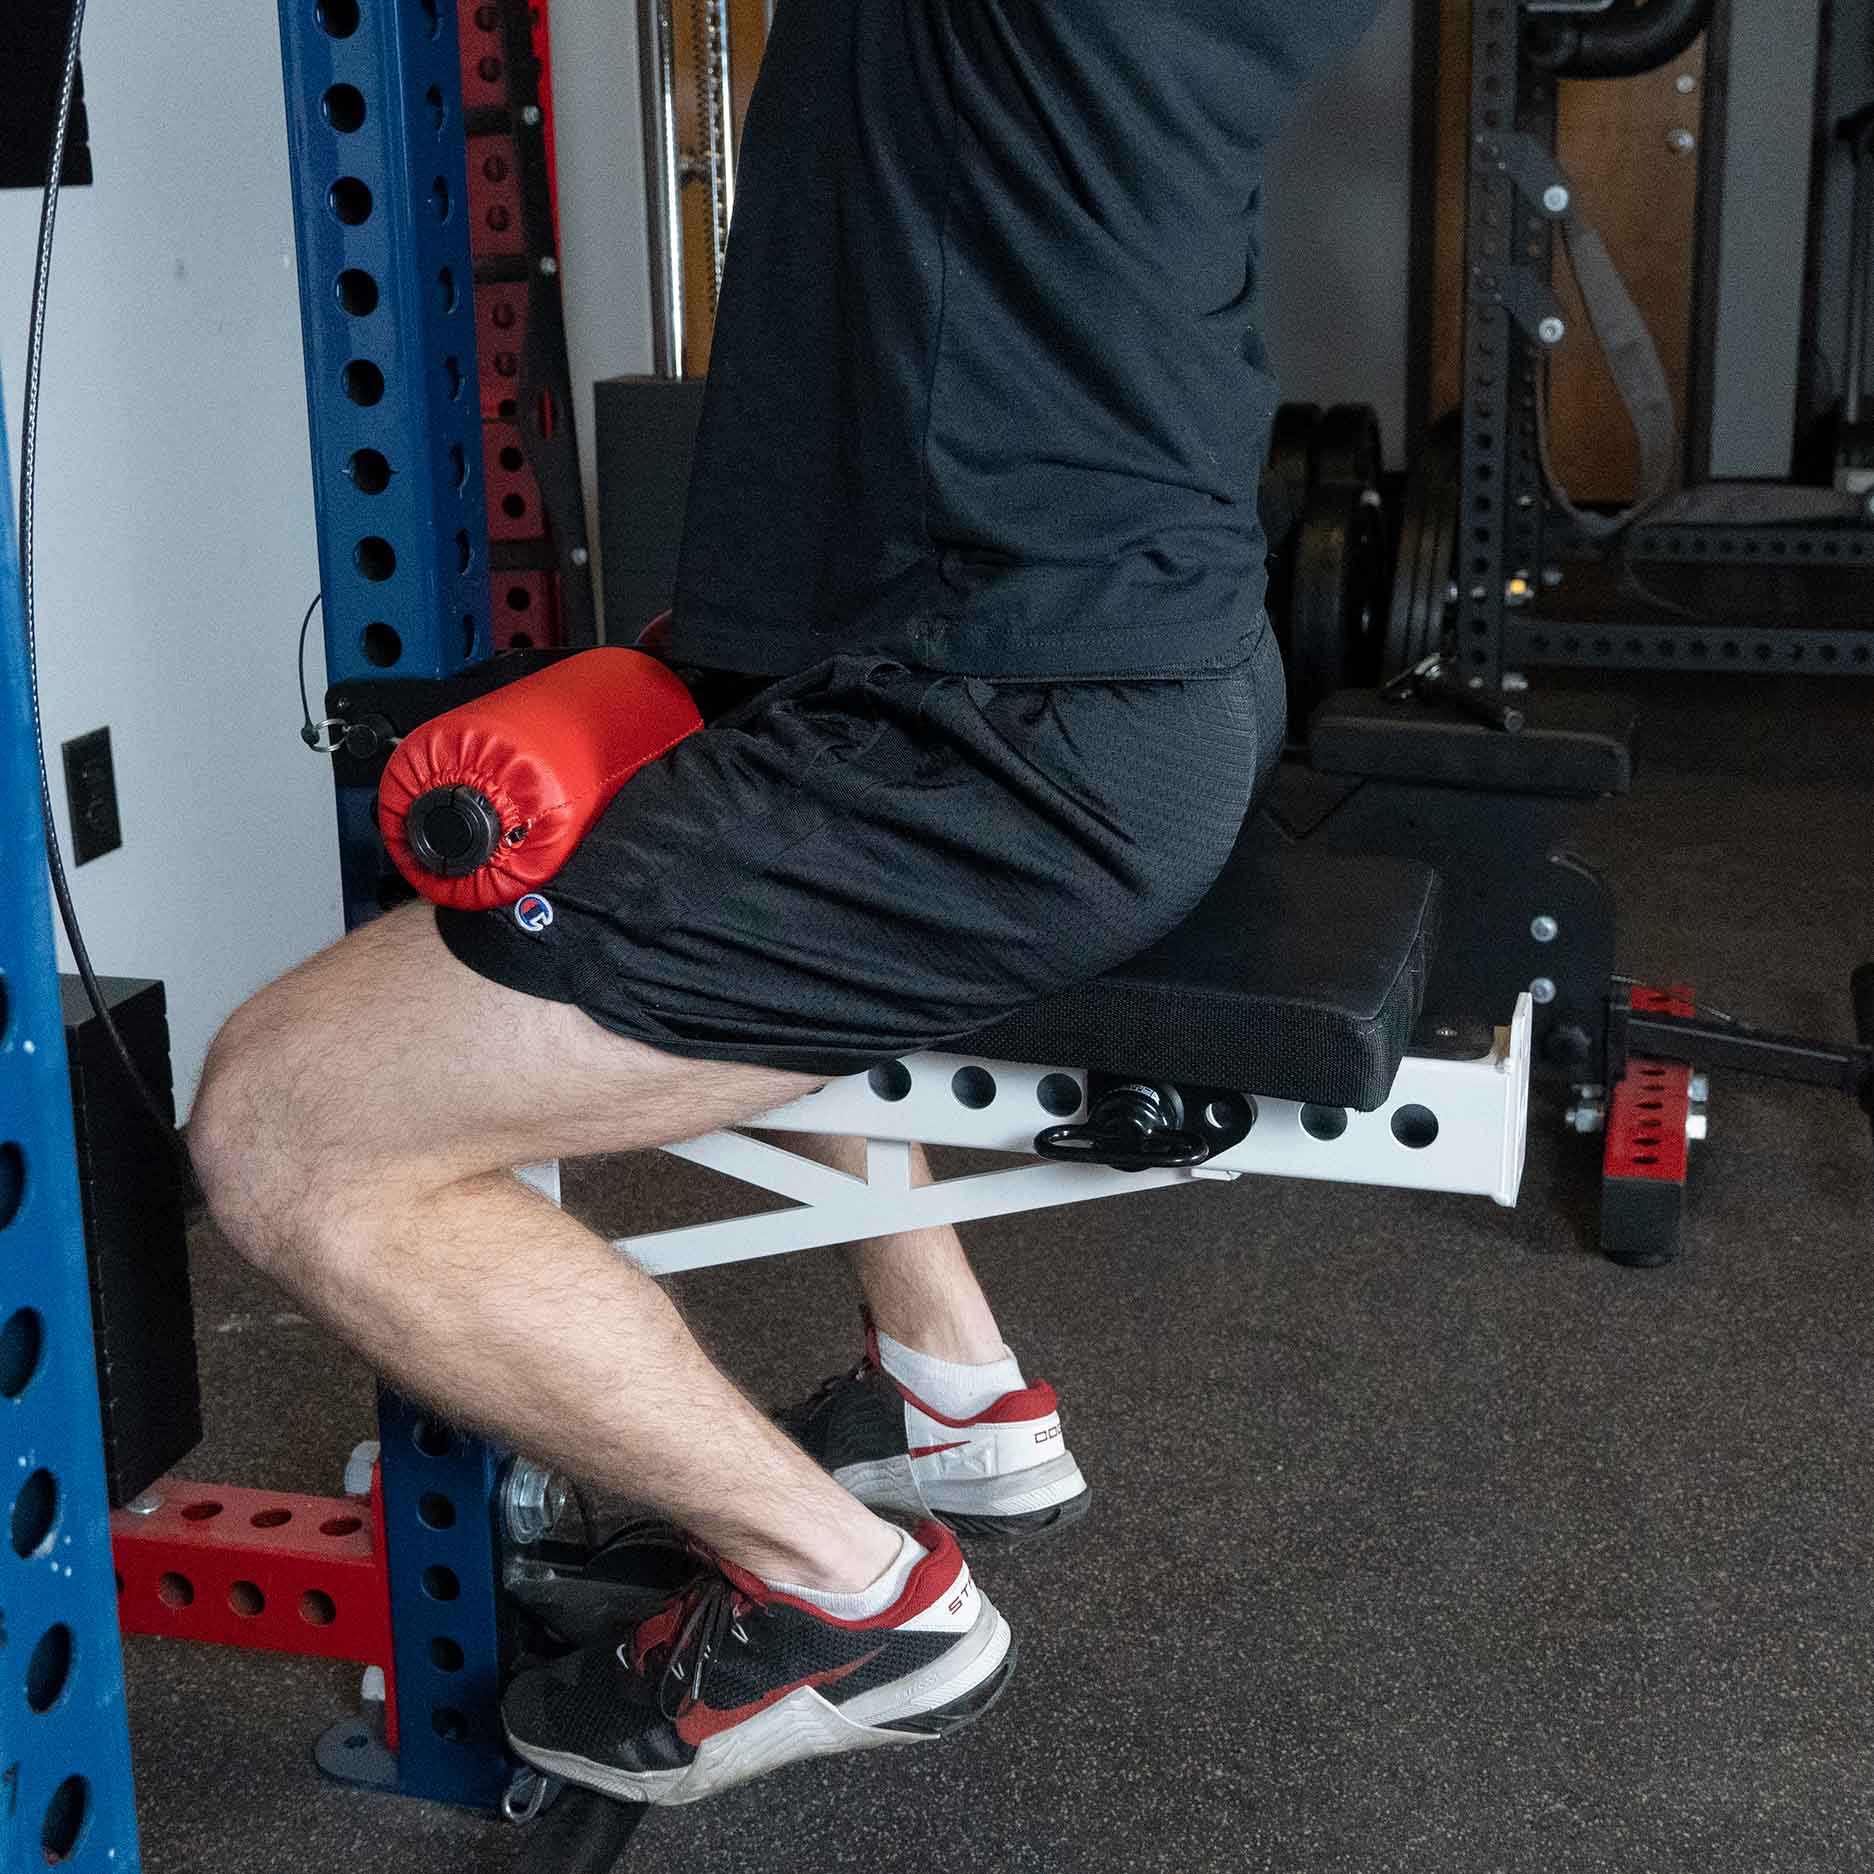 https://straydogstrength.com/wp-content/uploads/2021/04/close-lat-pull-down-side-of-seat.jpg